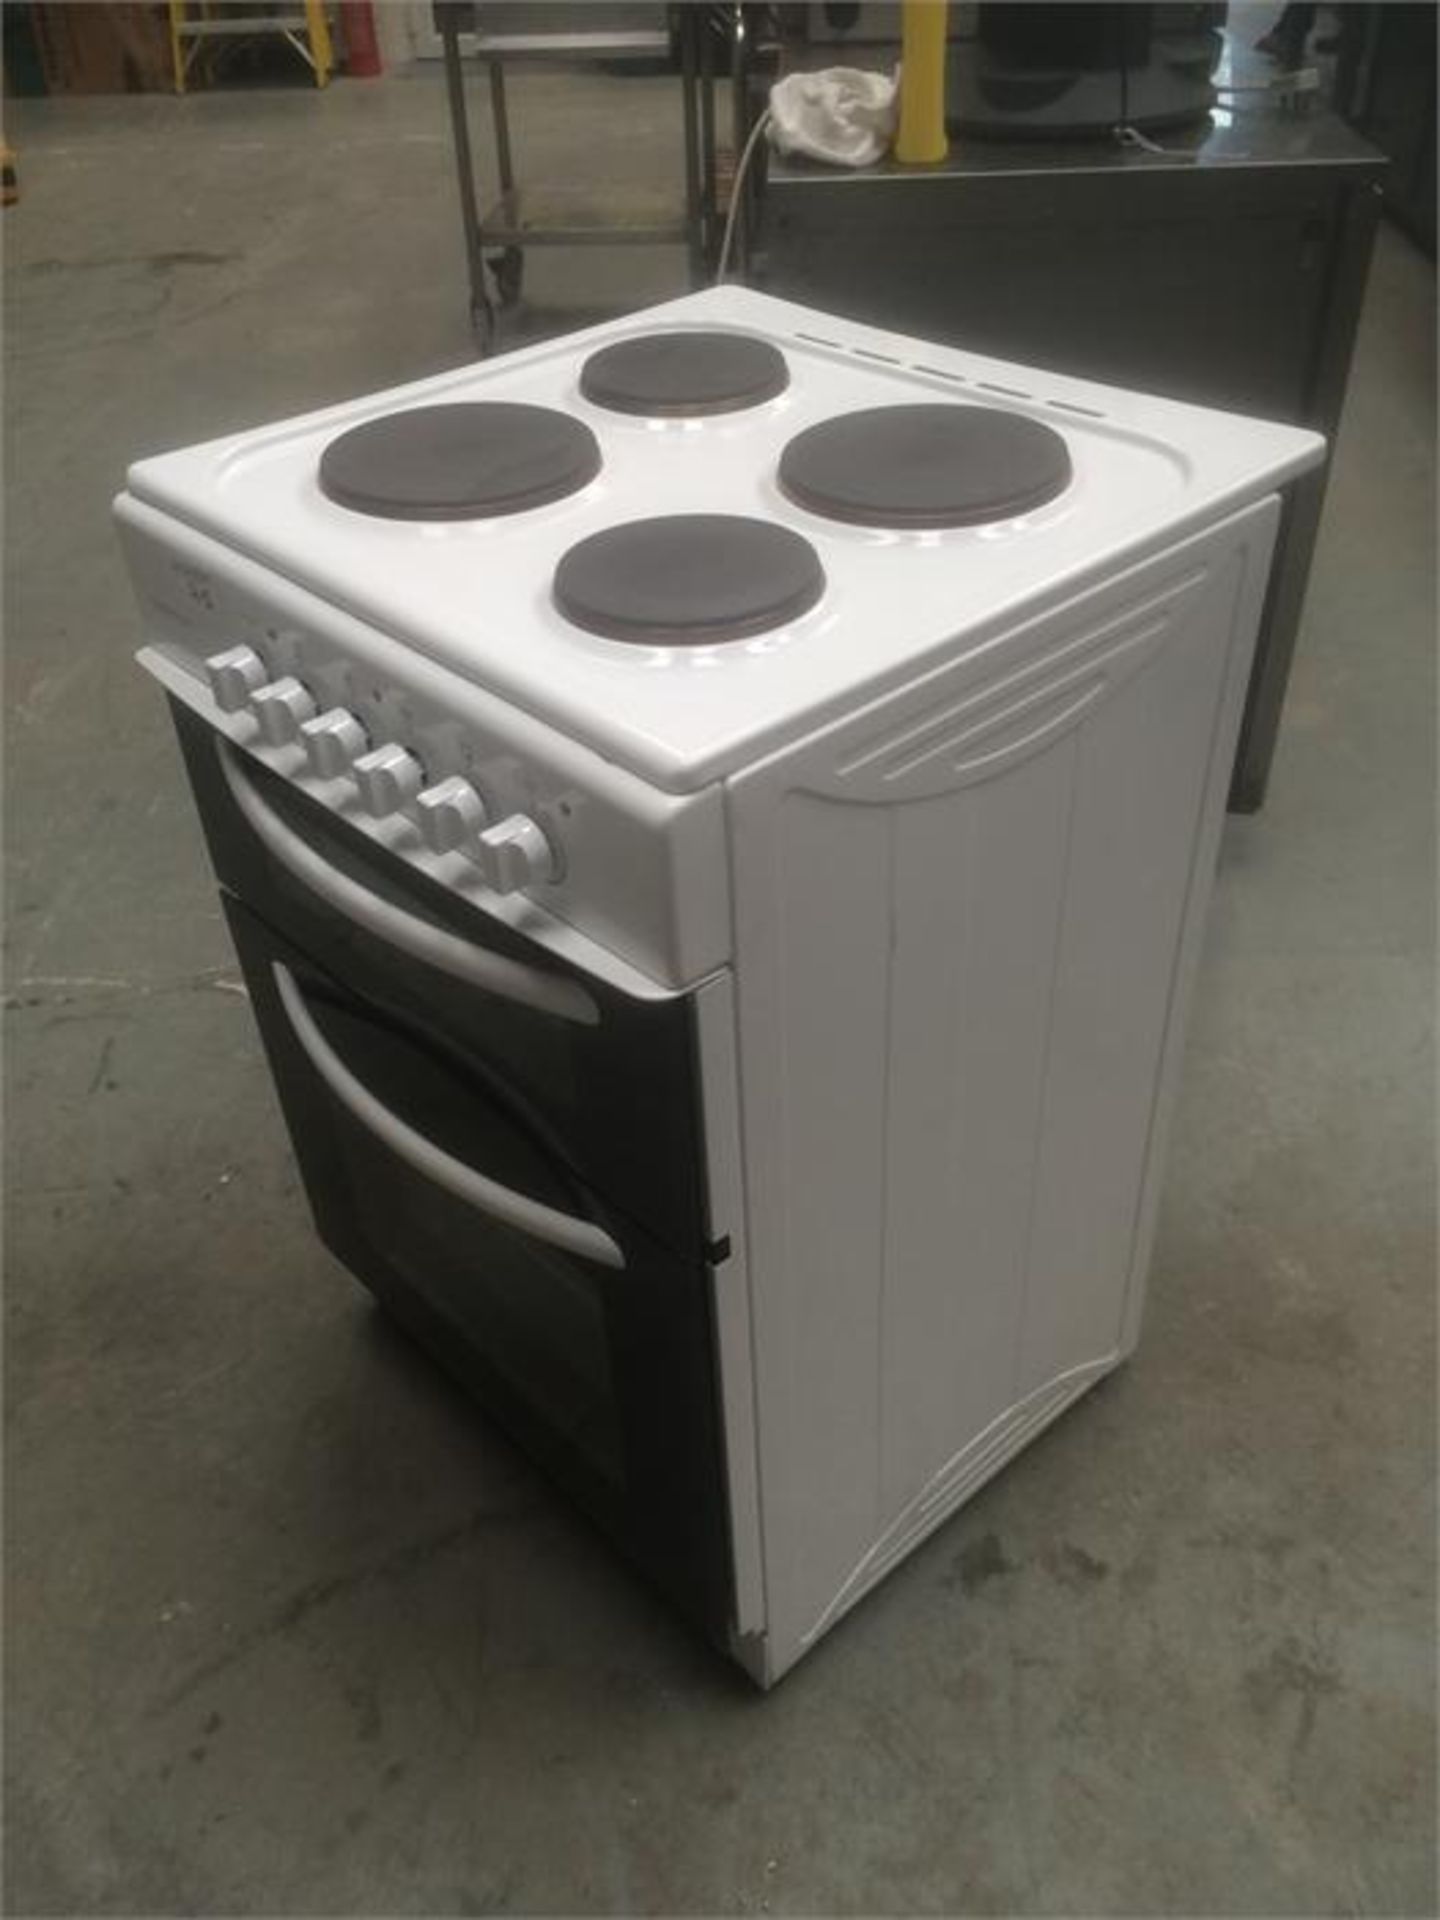 Cookworks, 4 Ring Electric Domestic Cooker 600 - Image 4 of 4